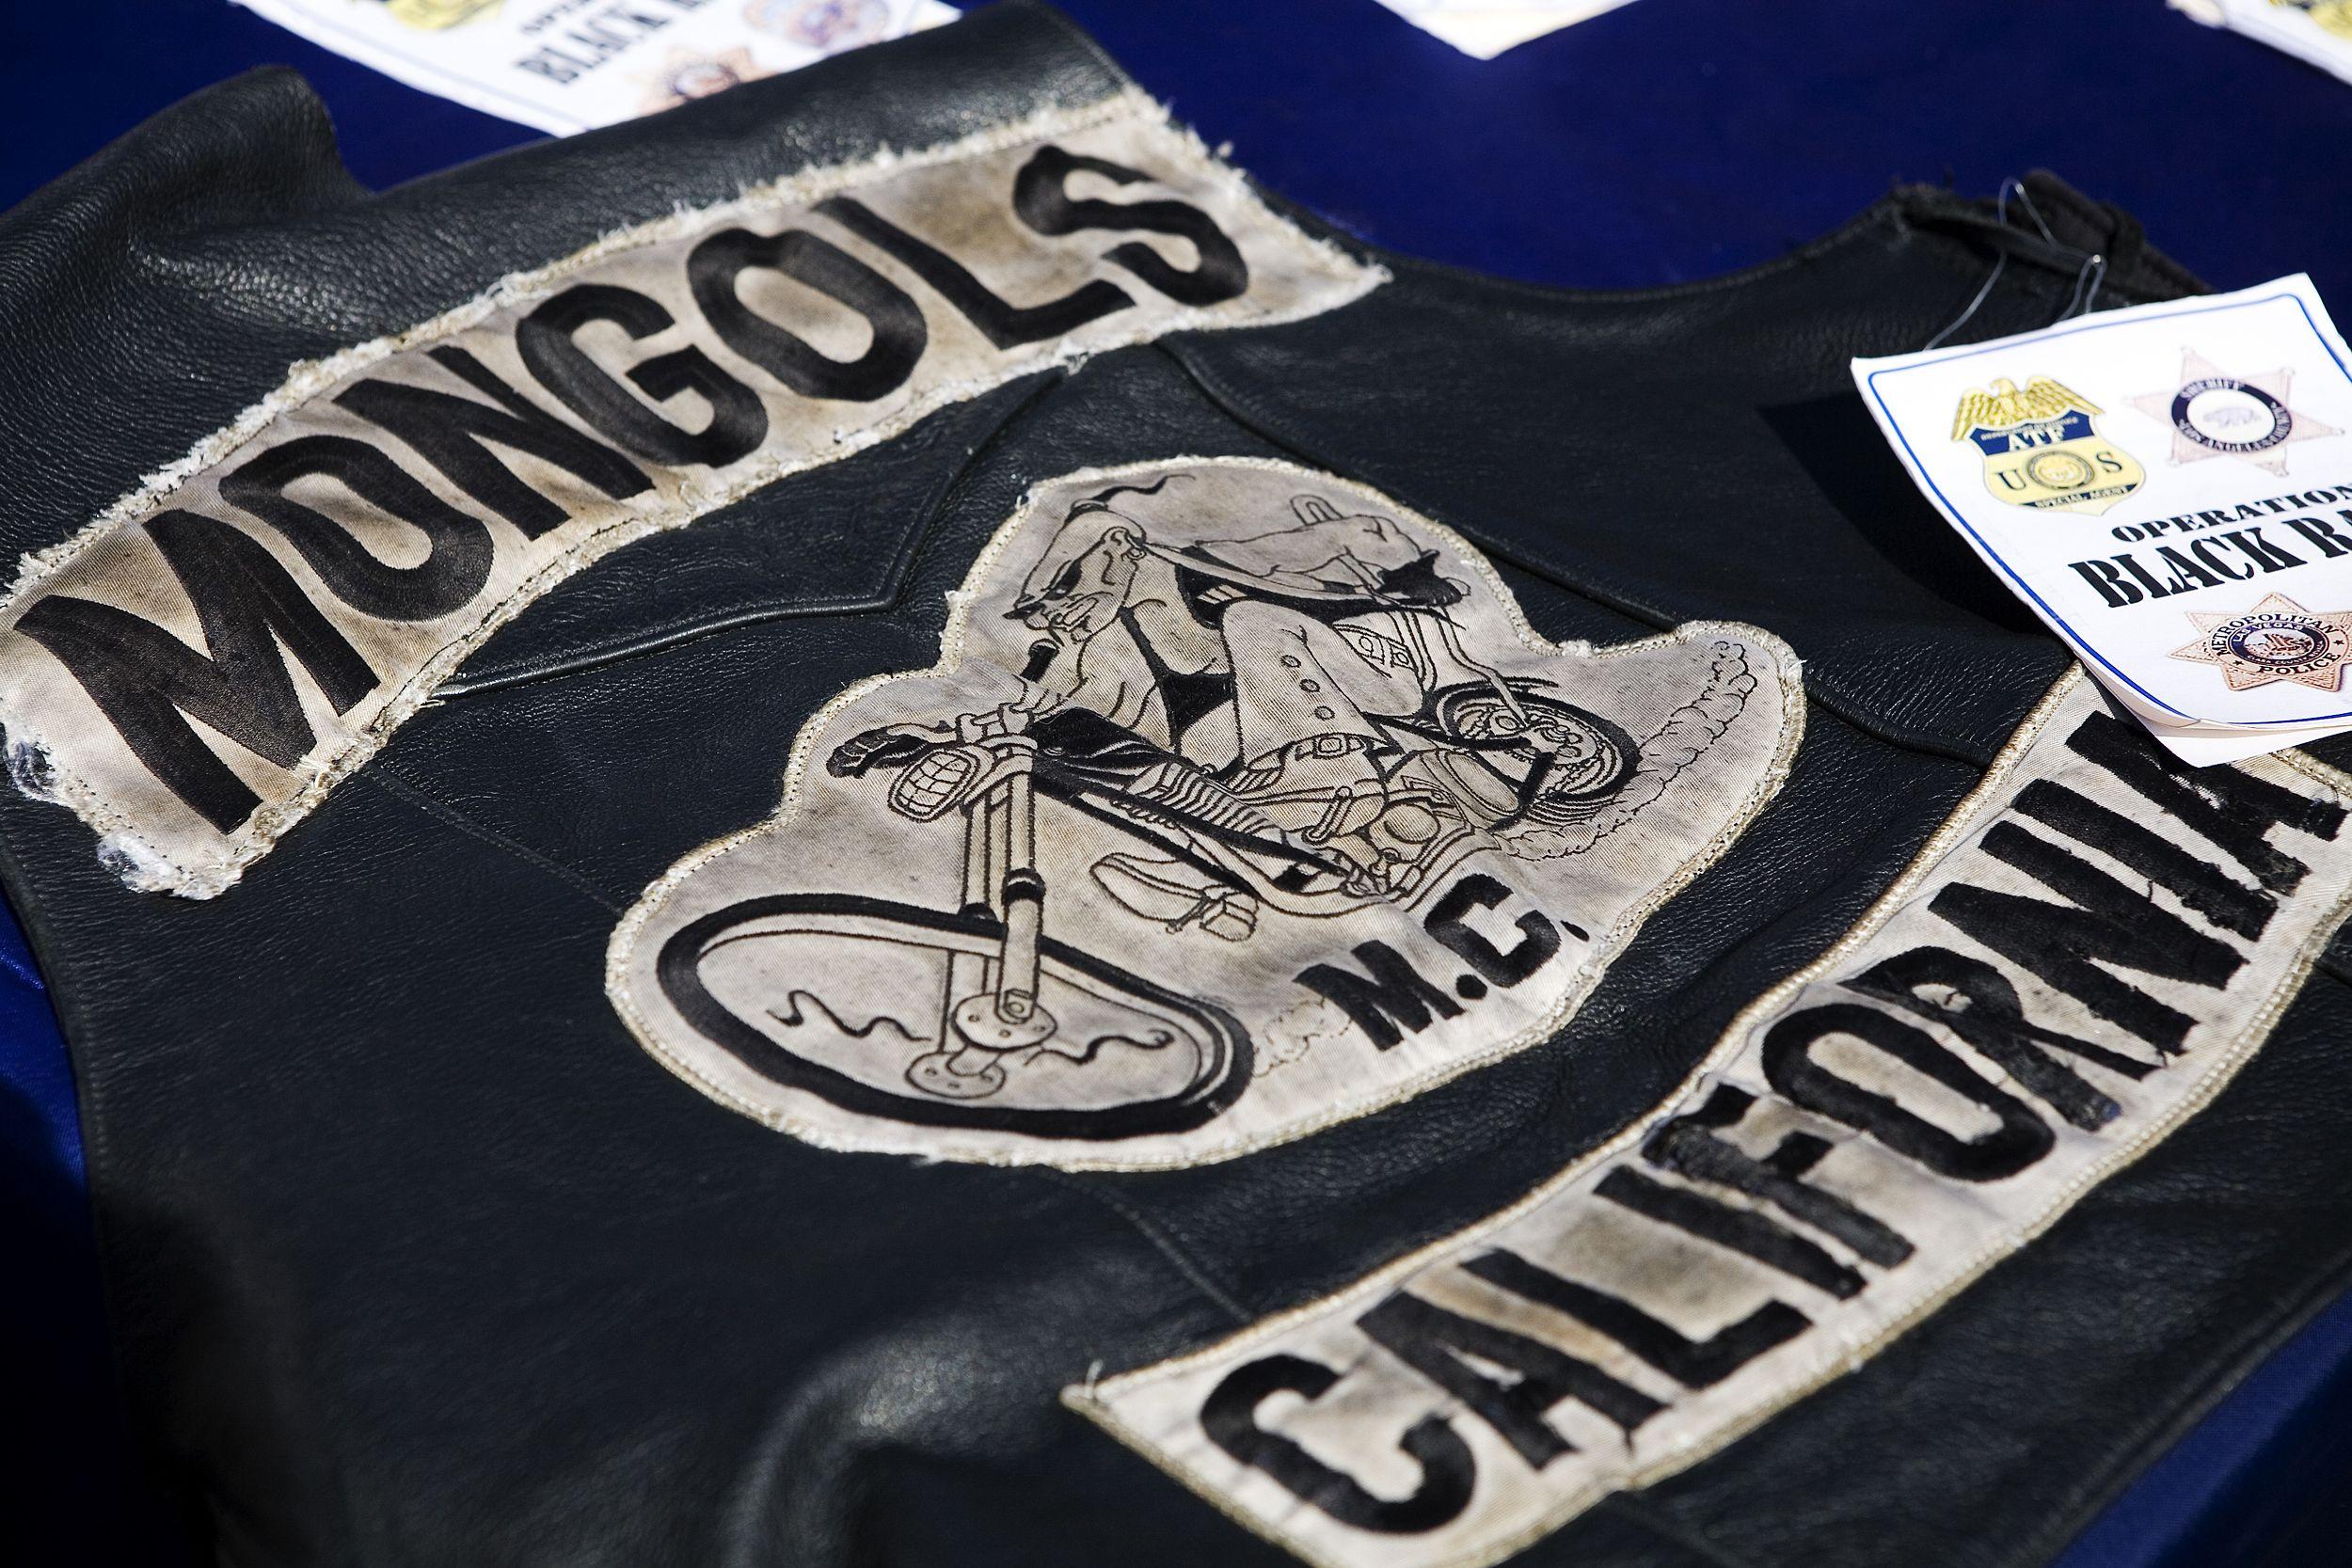 Mongols Logo - Judge fines Mongols motorcycle club $500,000, but group retains ...